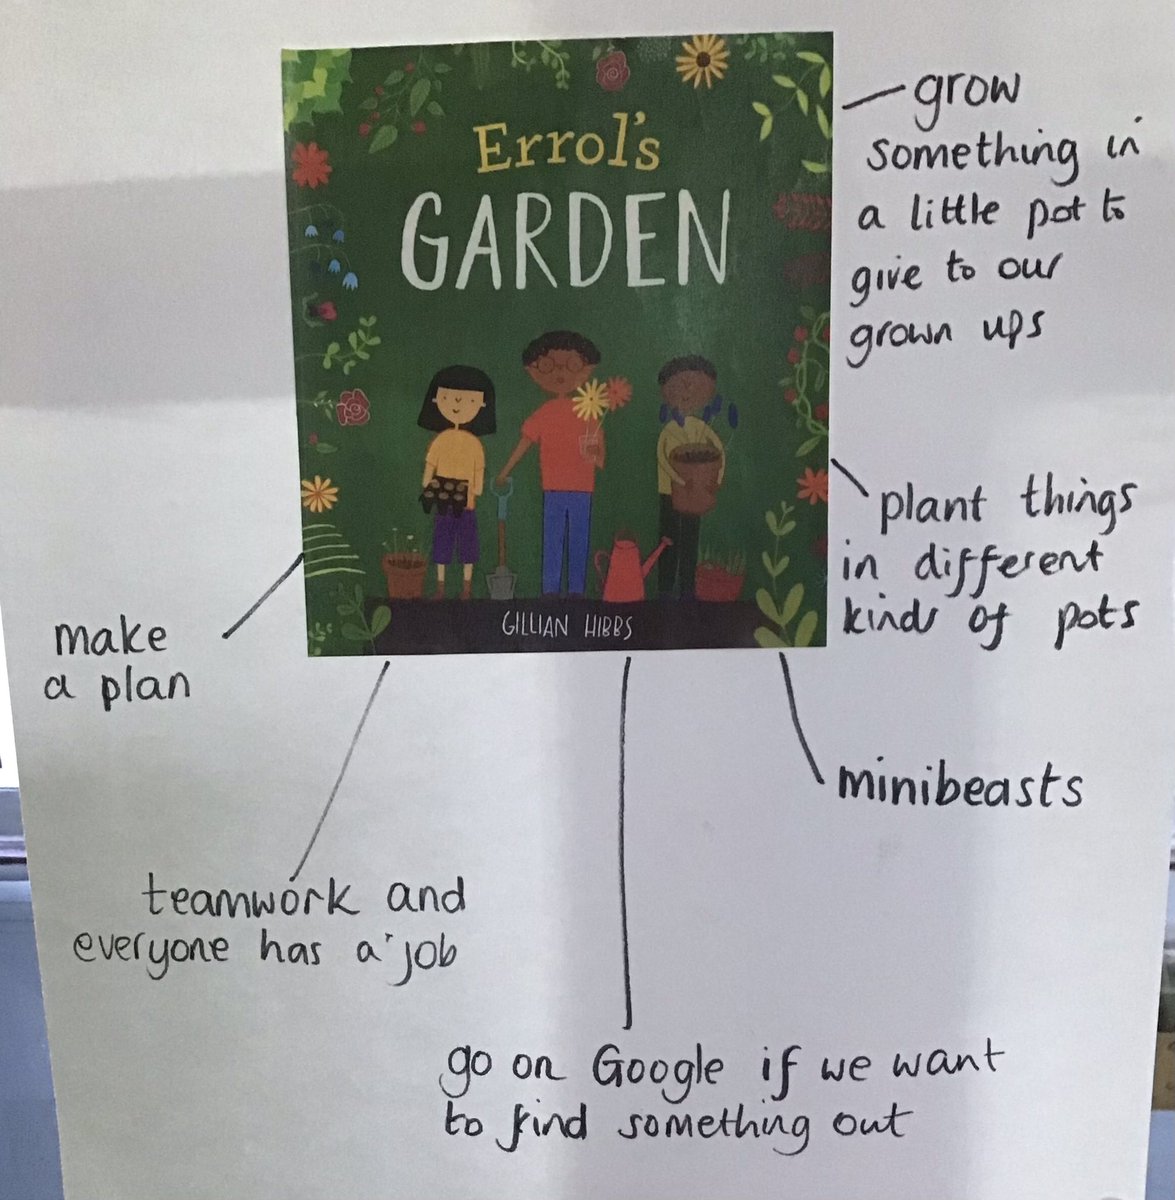 We read Errol’s garden and used the ideas to help us think about what we’d want in our new garden. Then we planned what we might put in the raised beds and tyres. #eastwhitbyreading #eastwhitbyeyfs #eastwhitbyscience #eastwhitbygeography